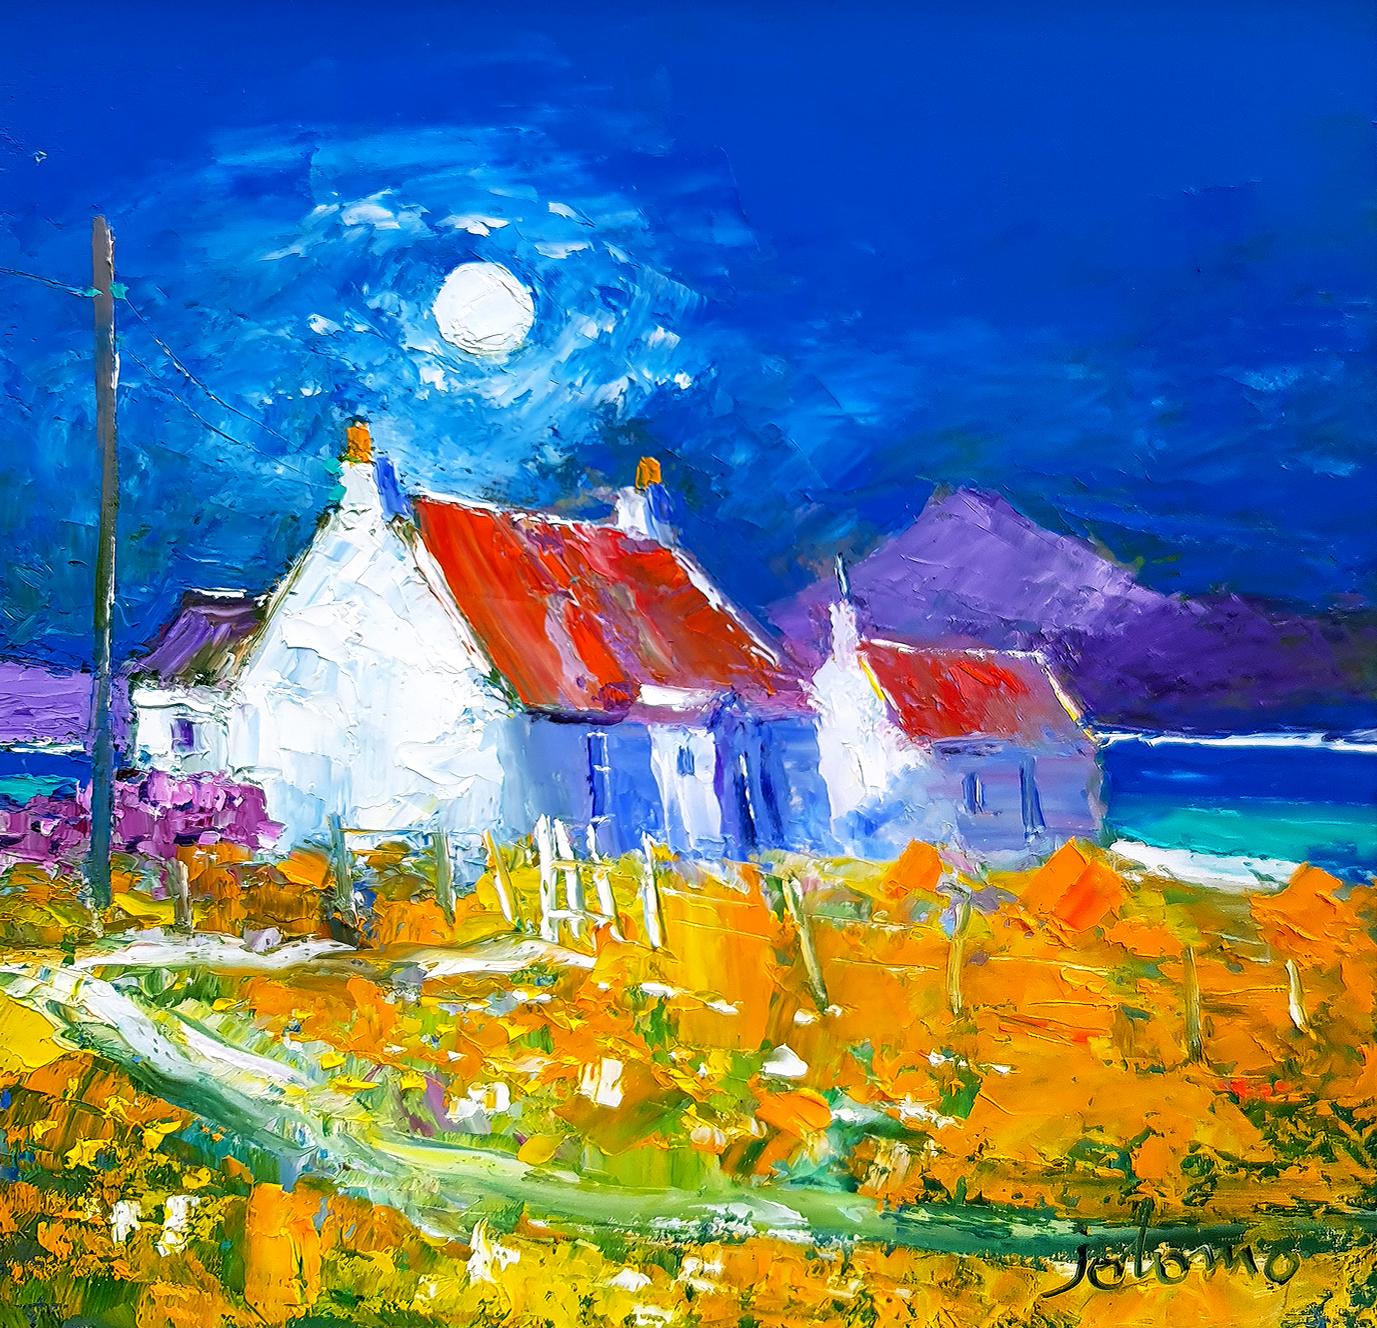 Cnoc-Cuil-Phail Croft, Isle of Iona - Painting by JOLOMO - John Lowrie Morrison OBE